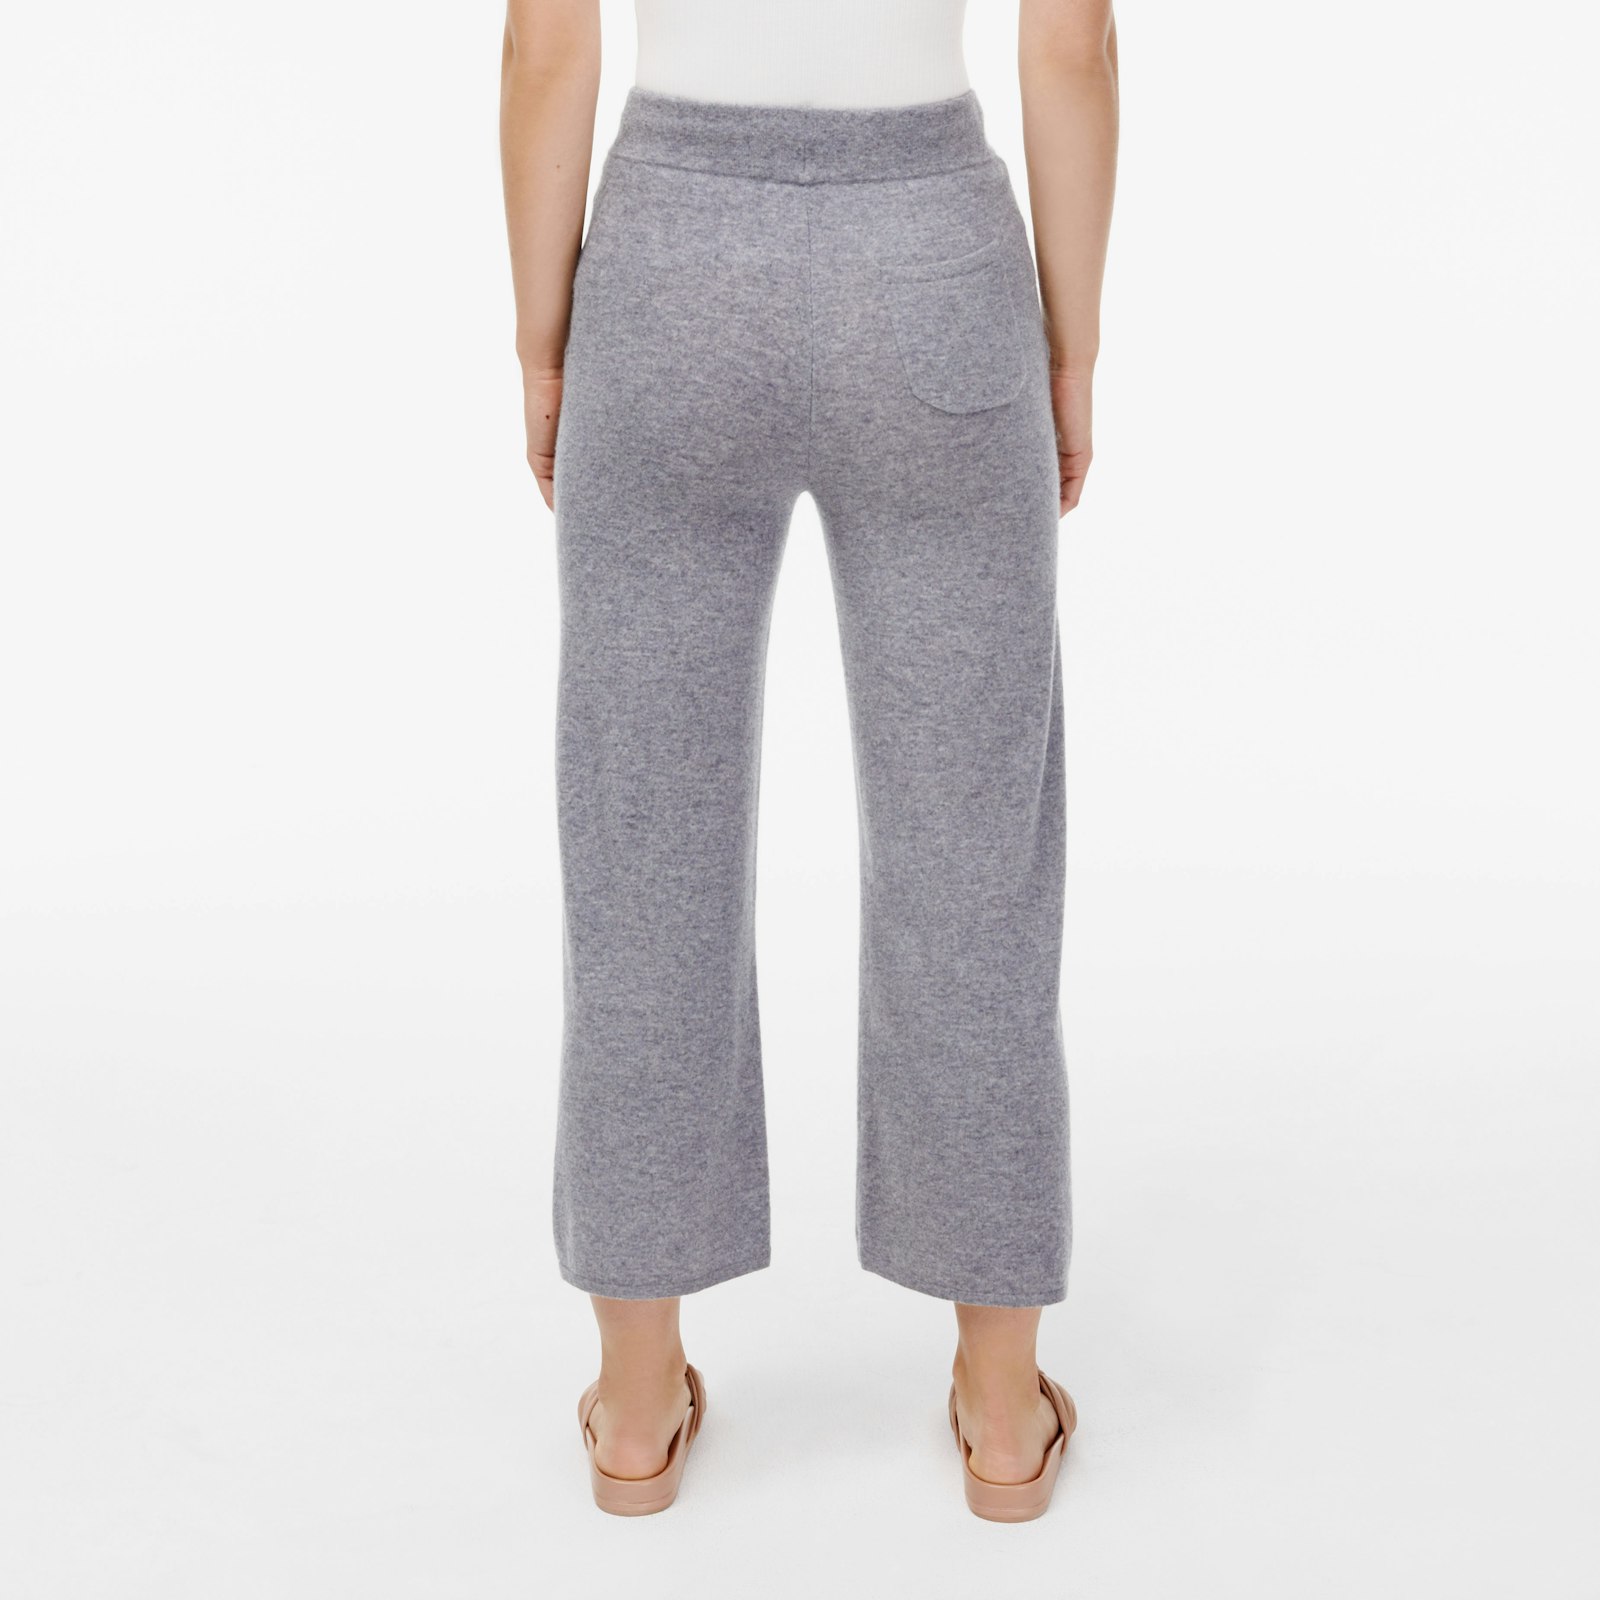 Recycled_Cashmere_LoungePant_Gray_Womens_OnFigure_1x1_1425.jpg